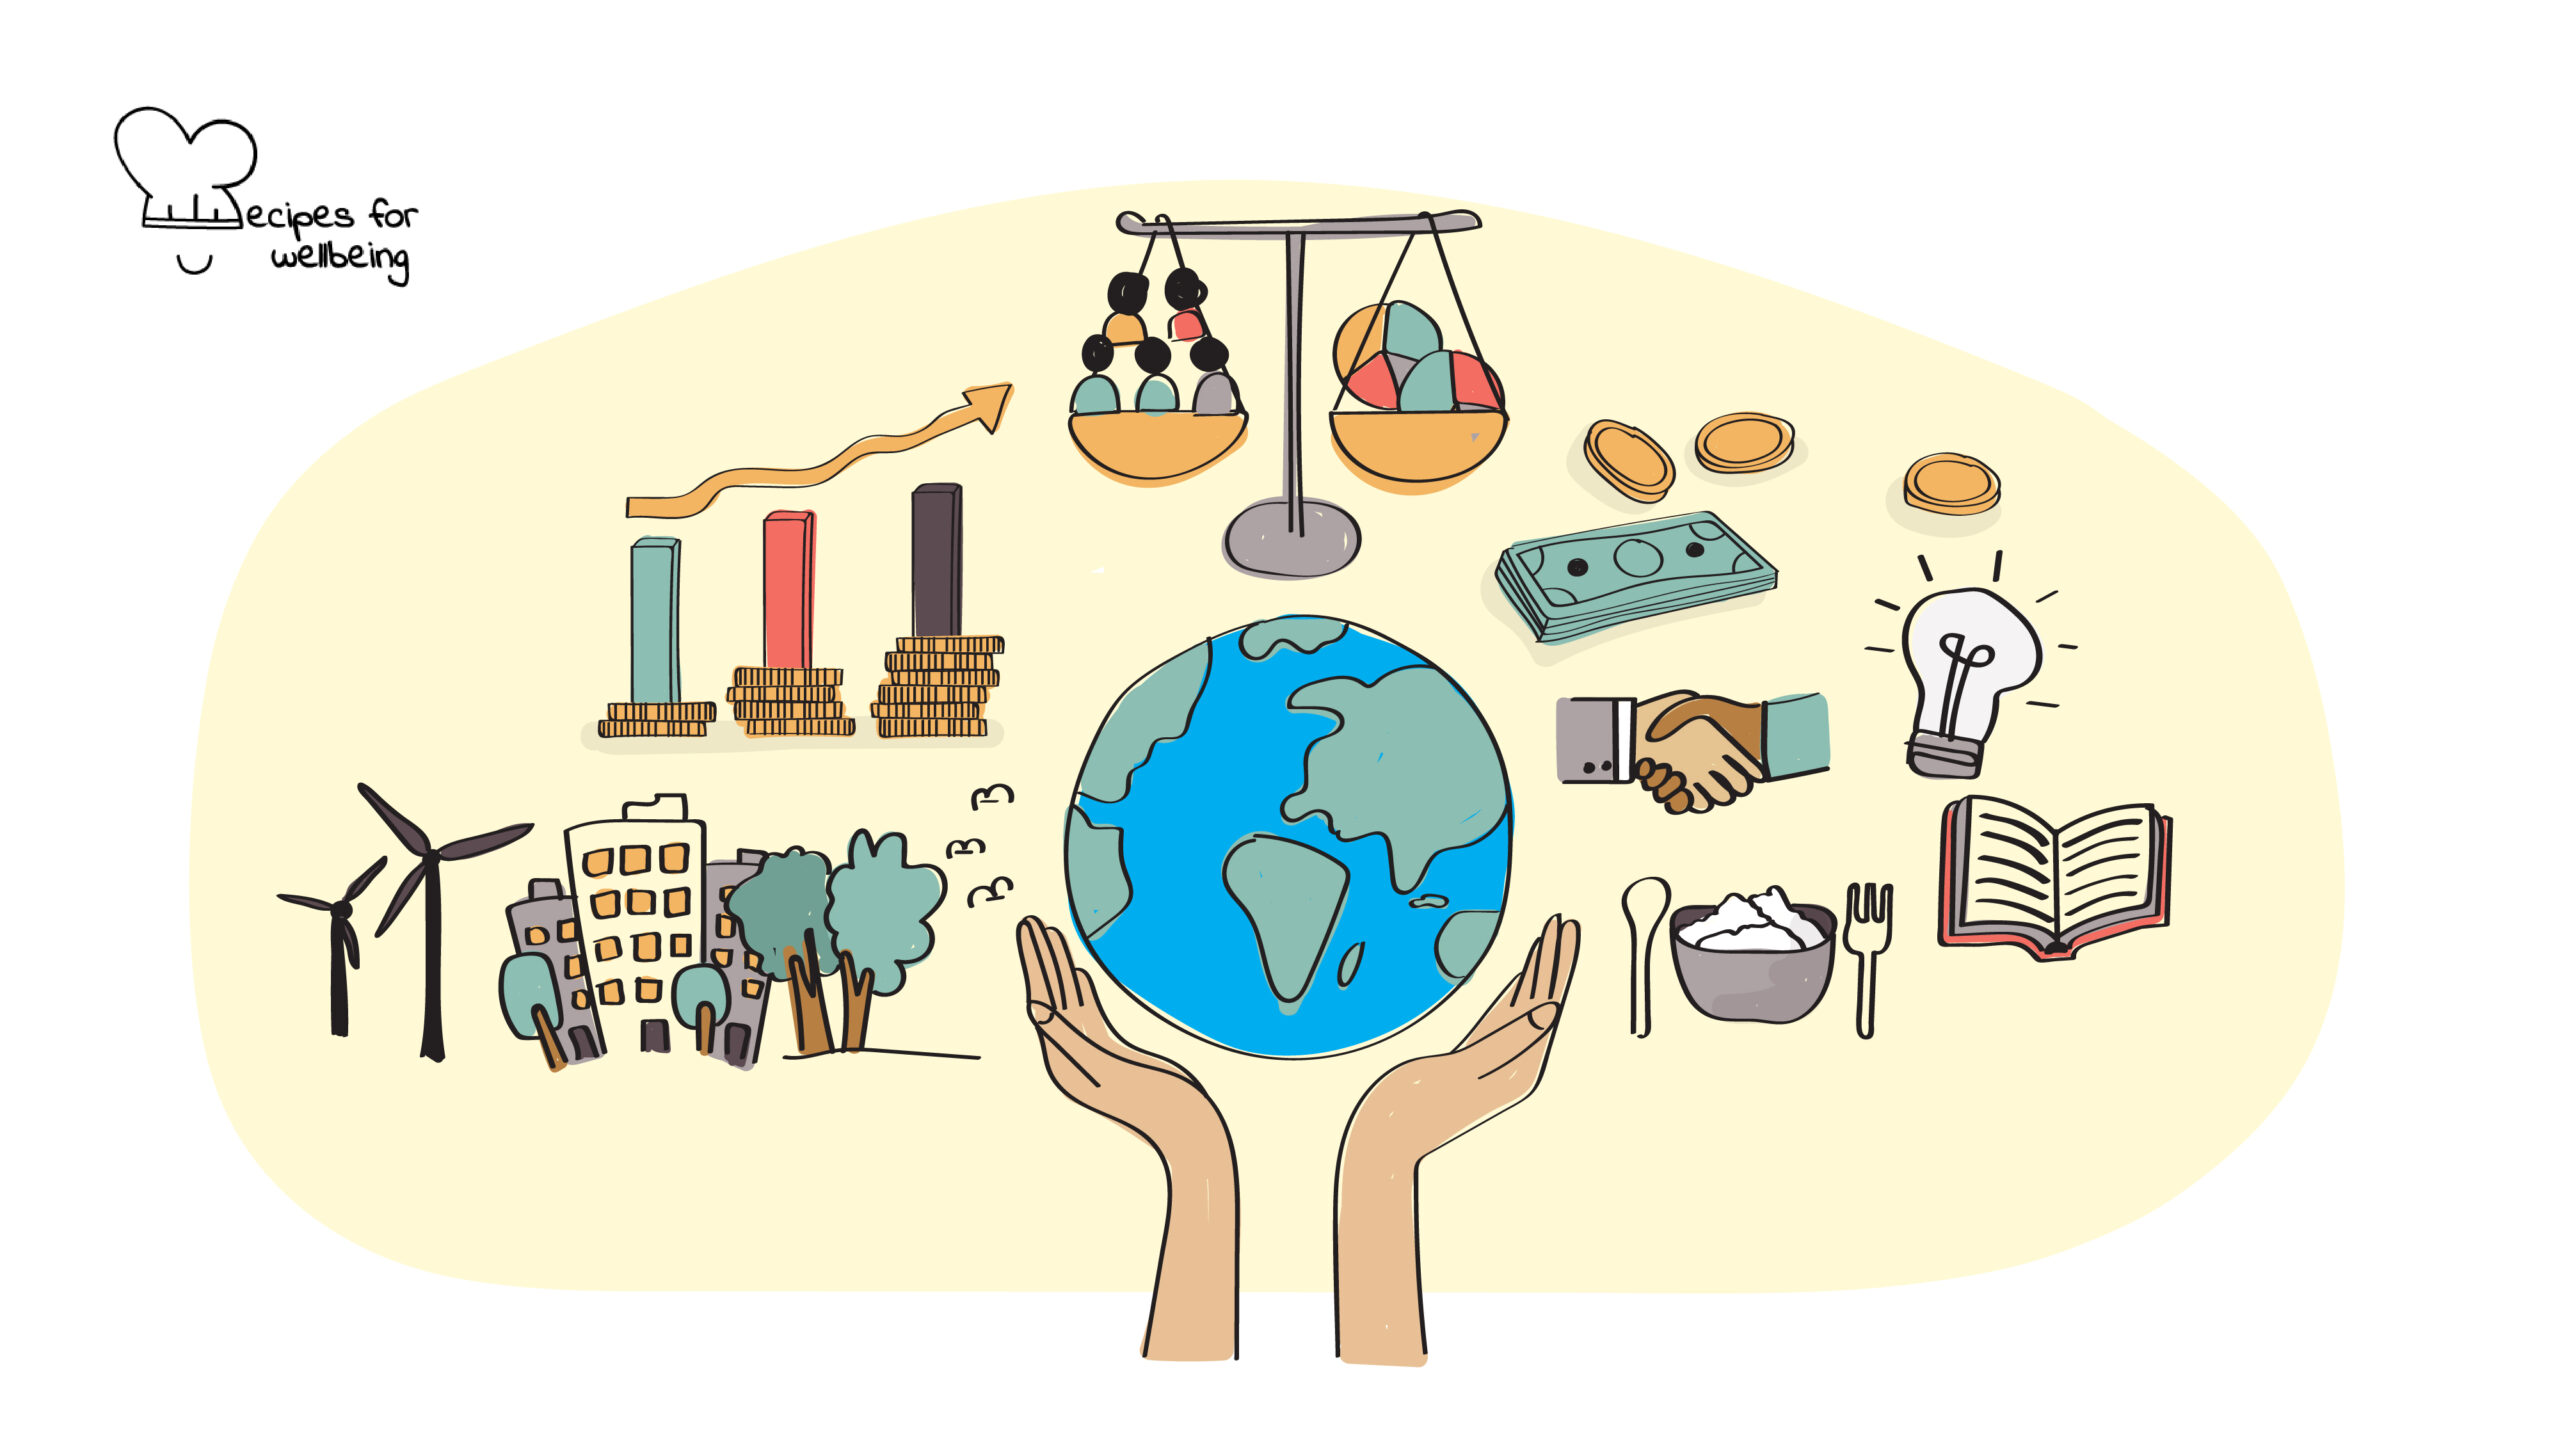 Illustration of a pair of hands holding a globe surrounded by various icons (e.g. a scale, a city, wind turbines, a book, a lightbulb, money, etc.). © Recipes for Wellbeing